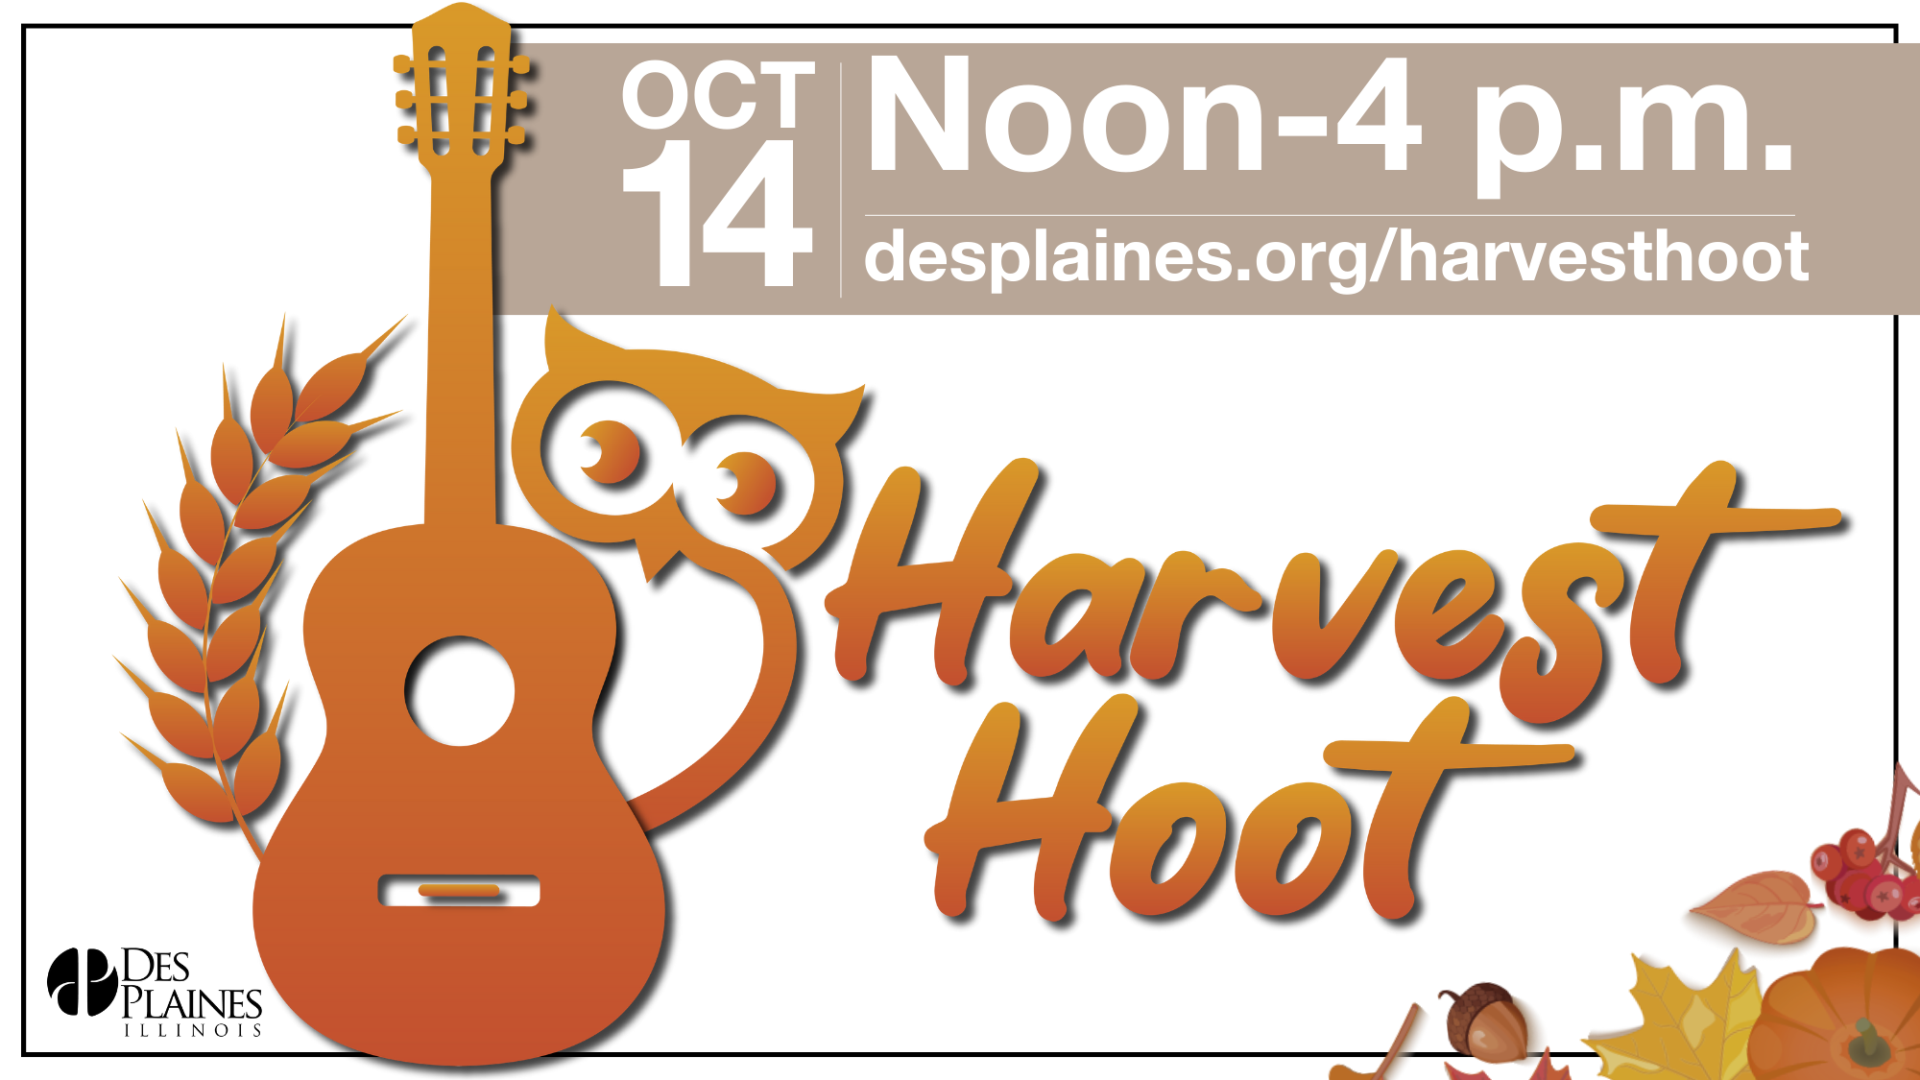 Come to the Harvest Hoot on Oct. 14!